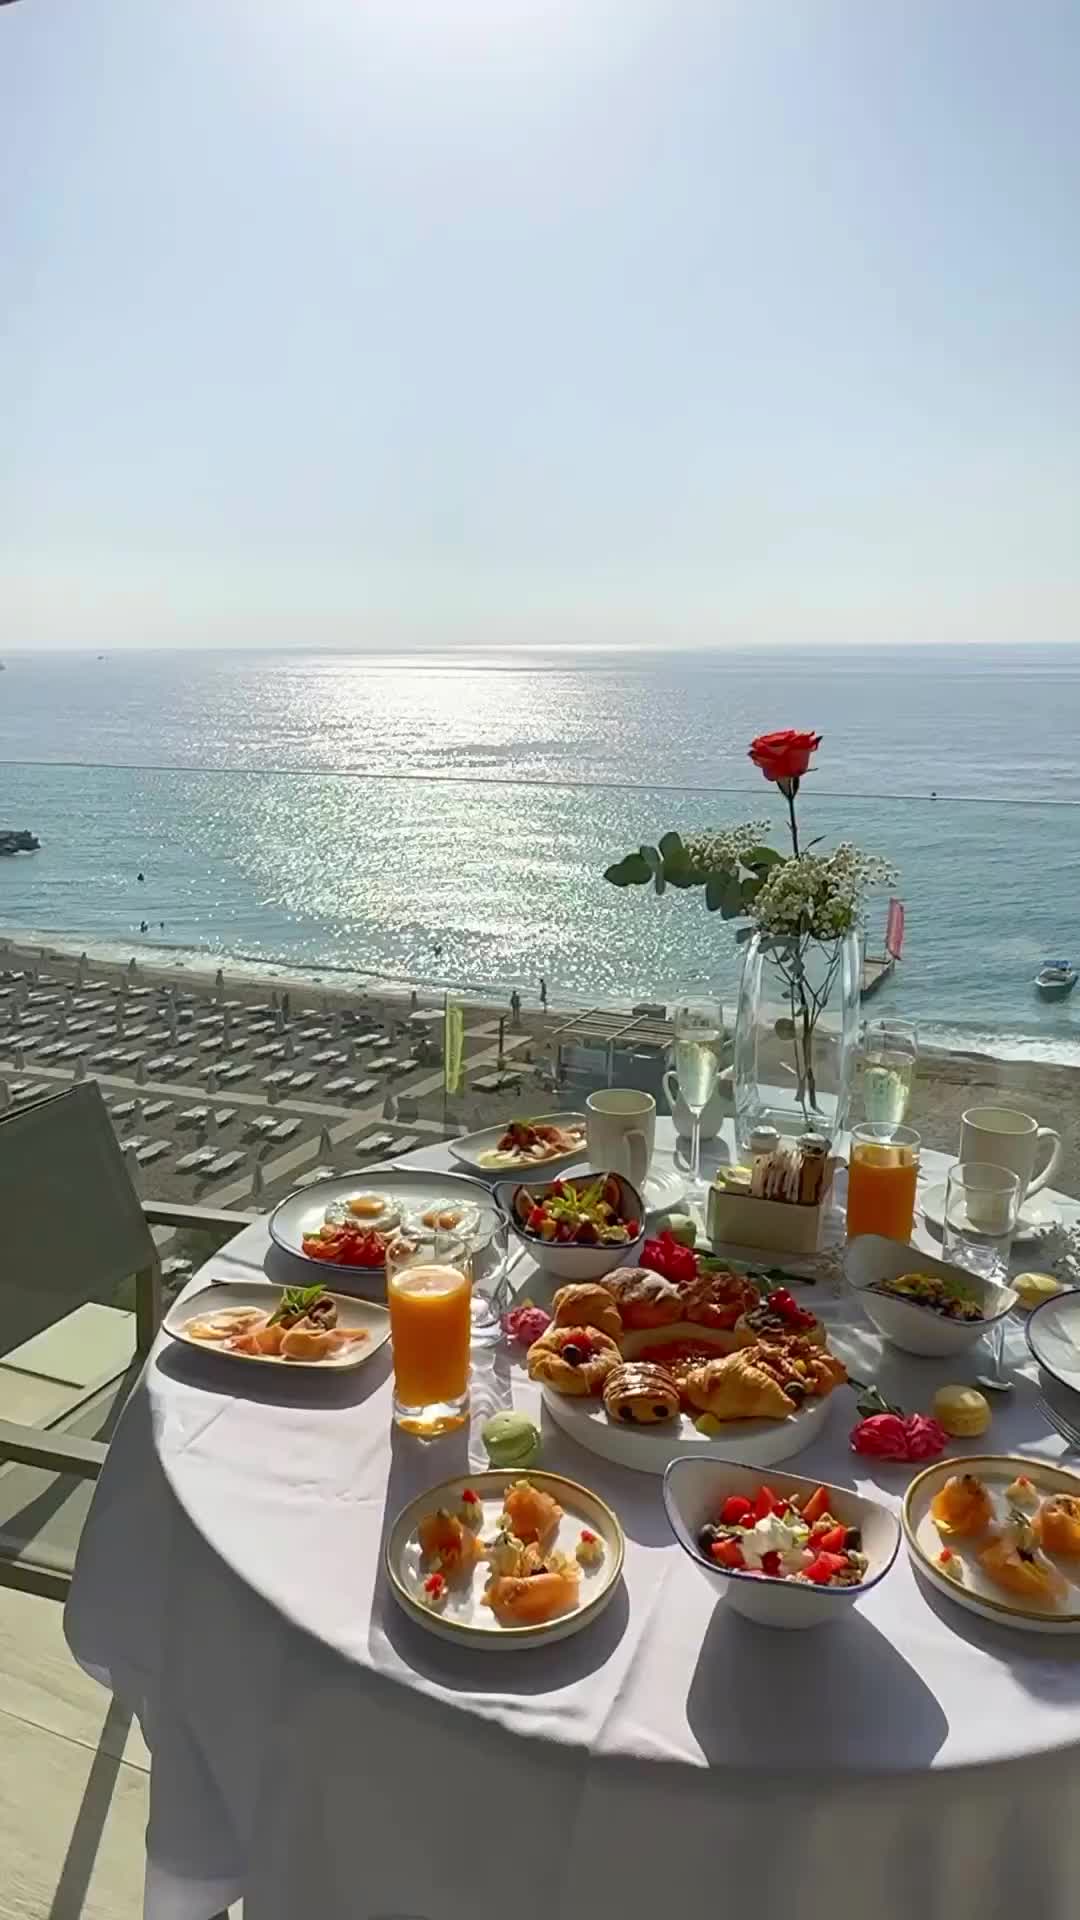 Breakfast Bliss with Stunning Views in Rhodes, Greece